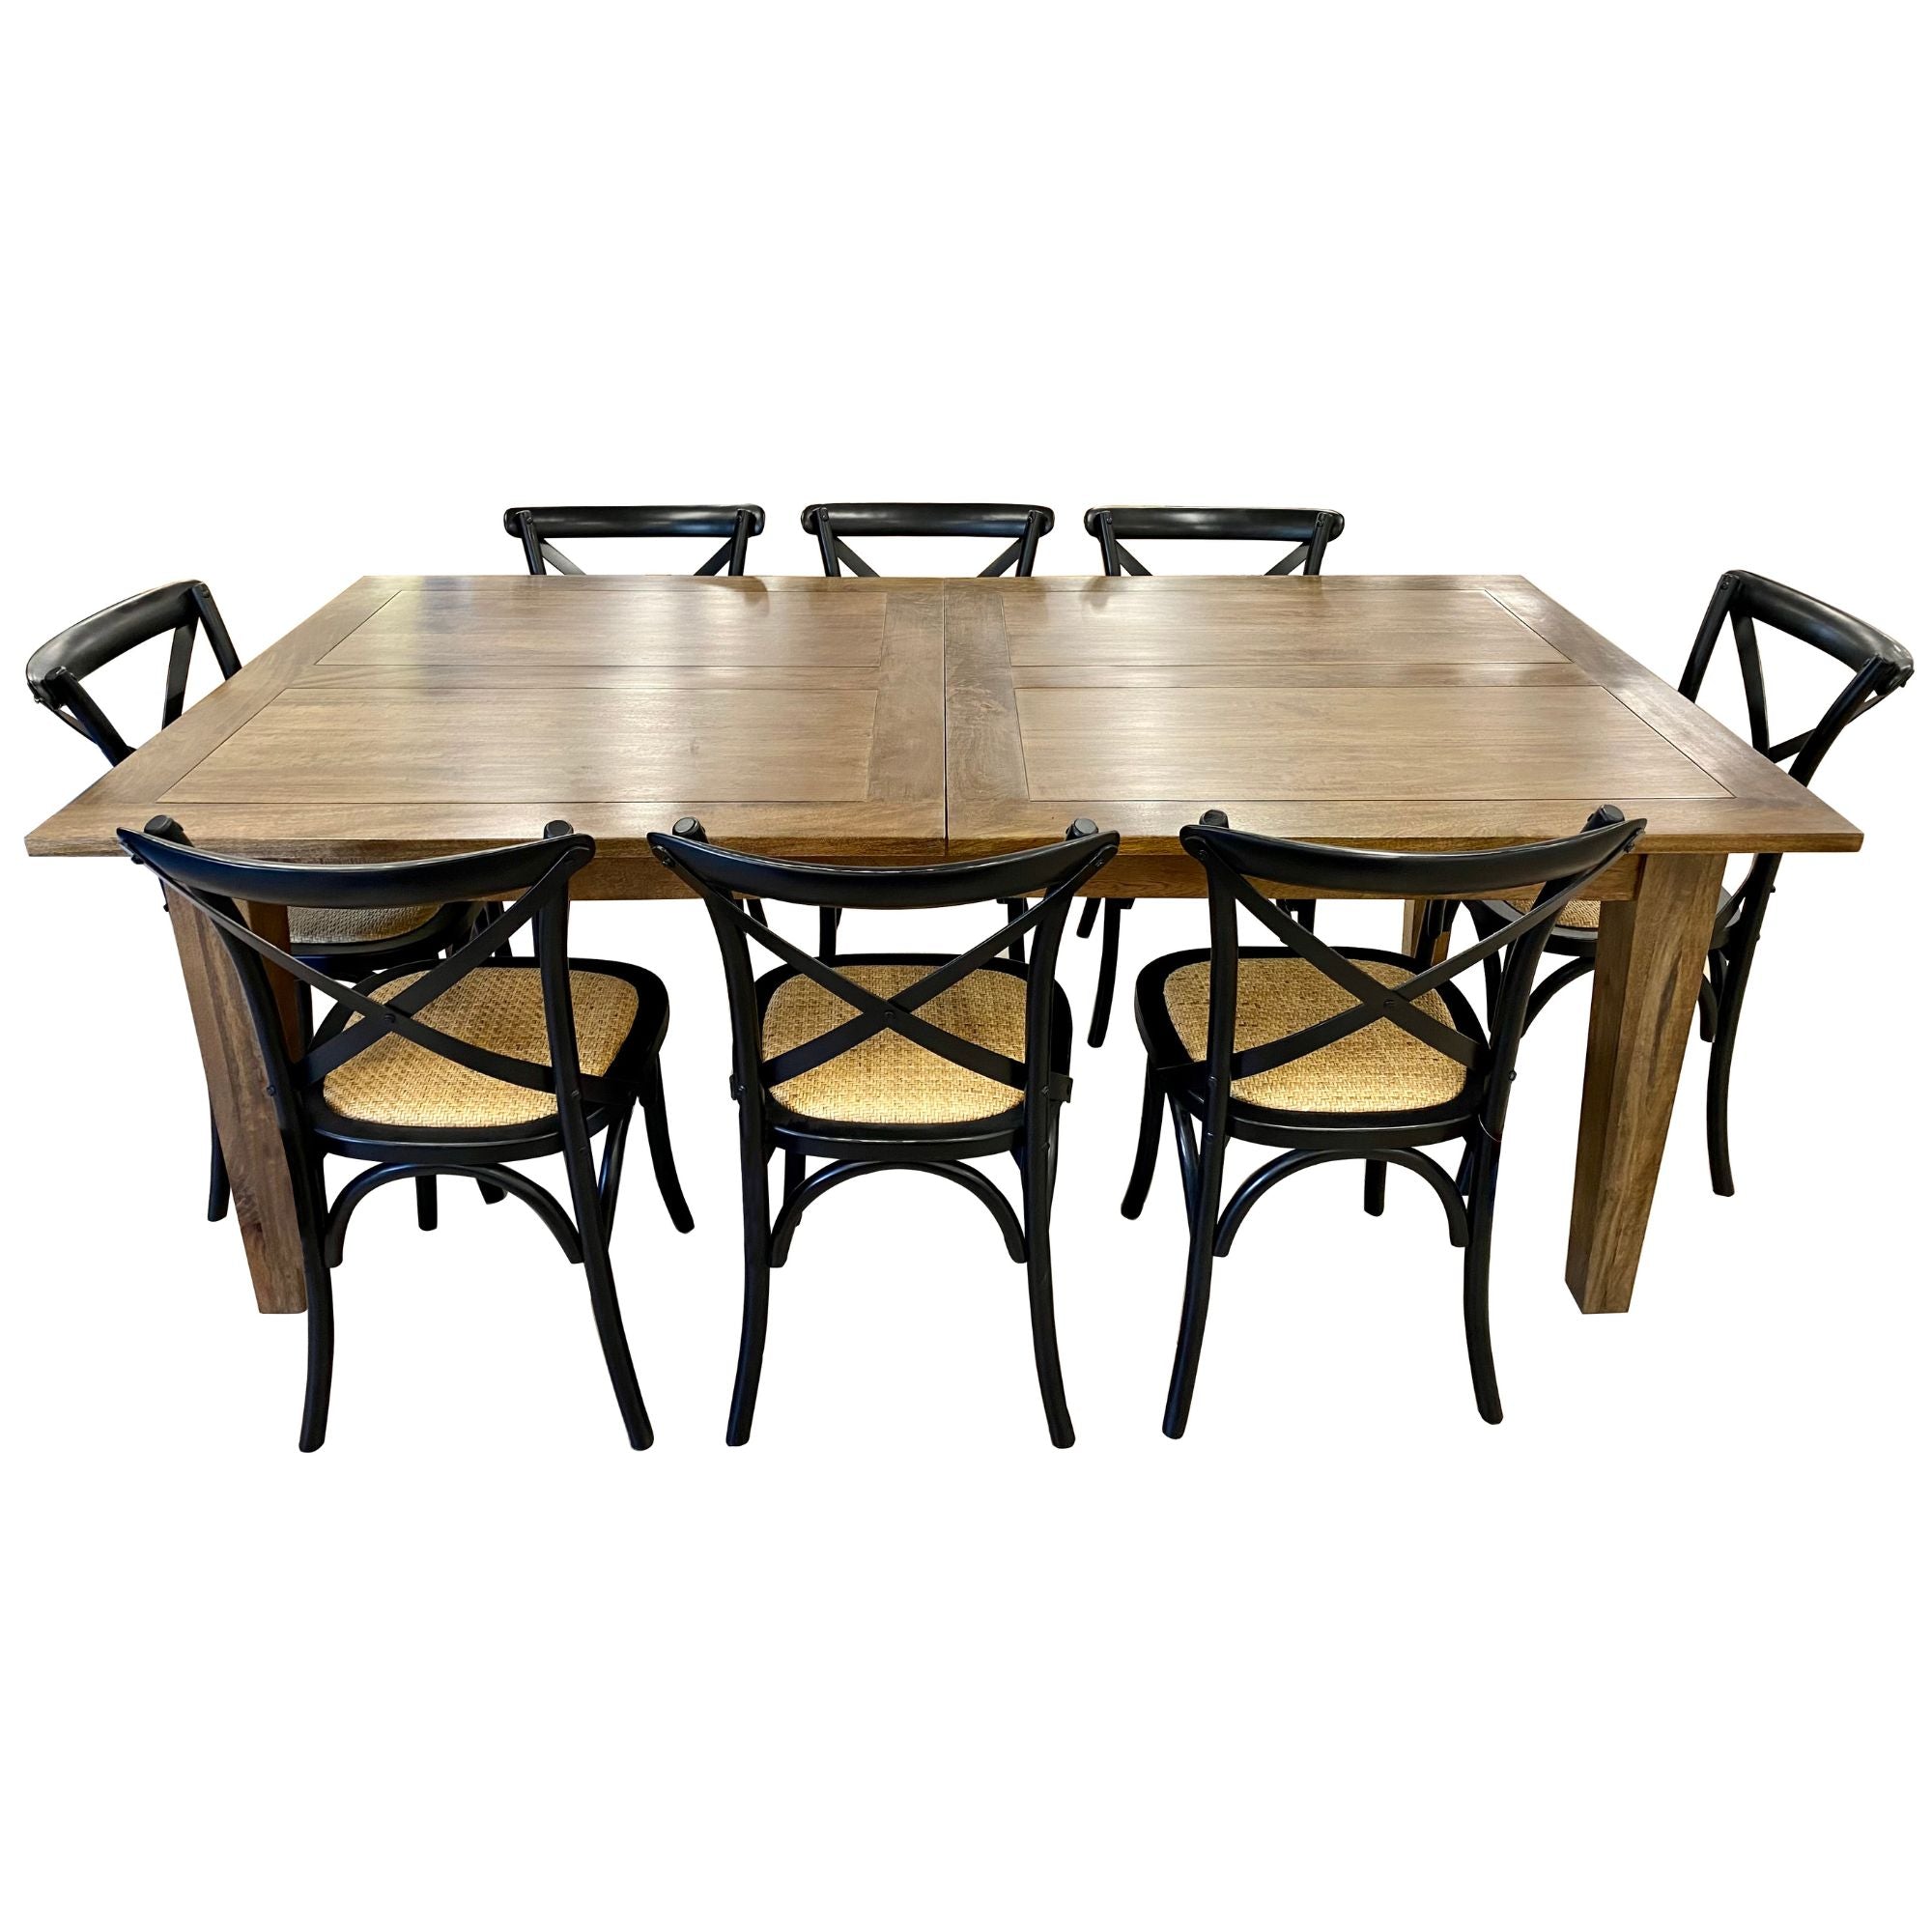 Aksa 9pc Dining Set 210-310cm Extension Timber Table 8 Black Cross Back Chair - SILBERSHELL